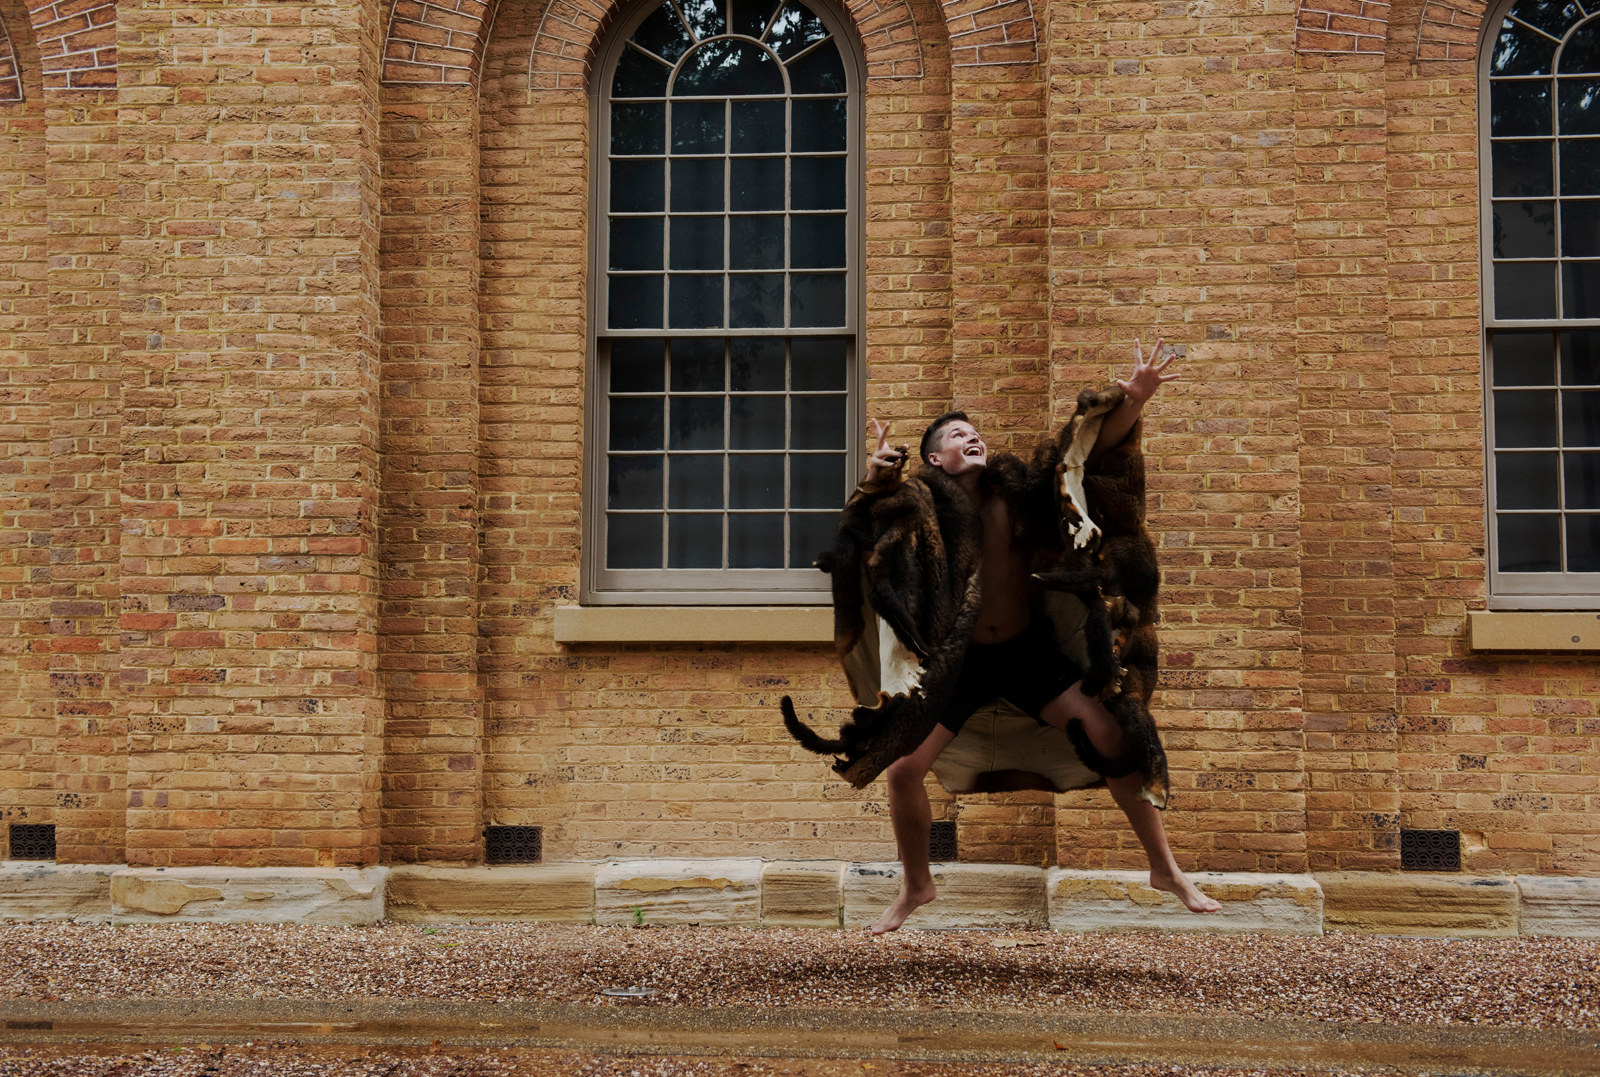 Campaign photos for Cutter and Coota, featuring a performer dressed in a possum skin cloak posing within the grounds of the Hyde Park Barracks.